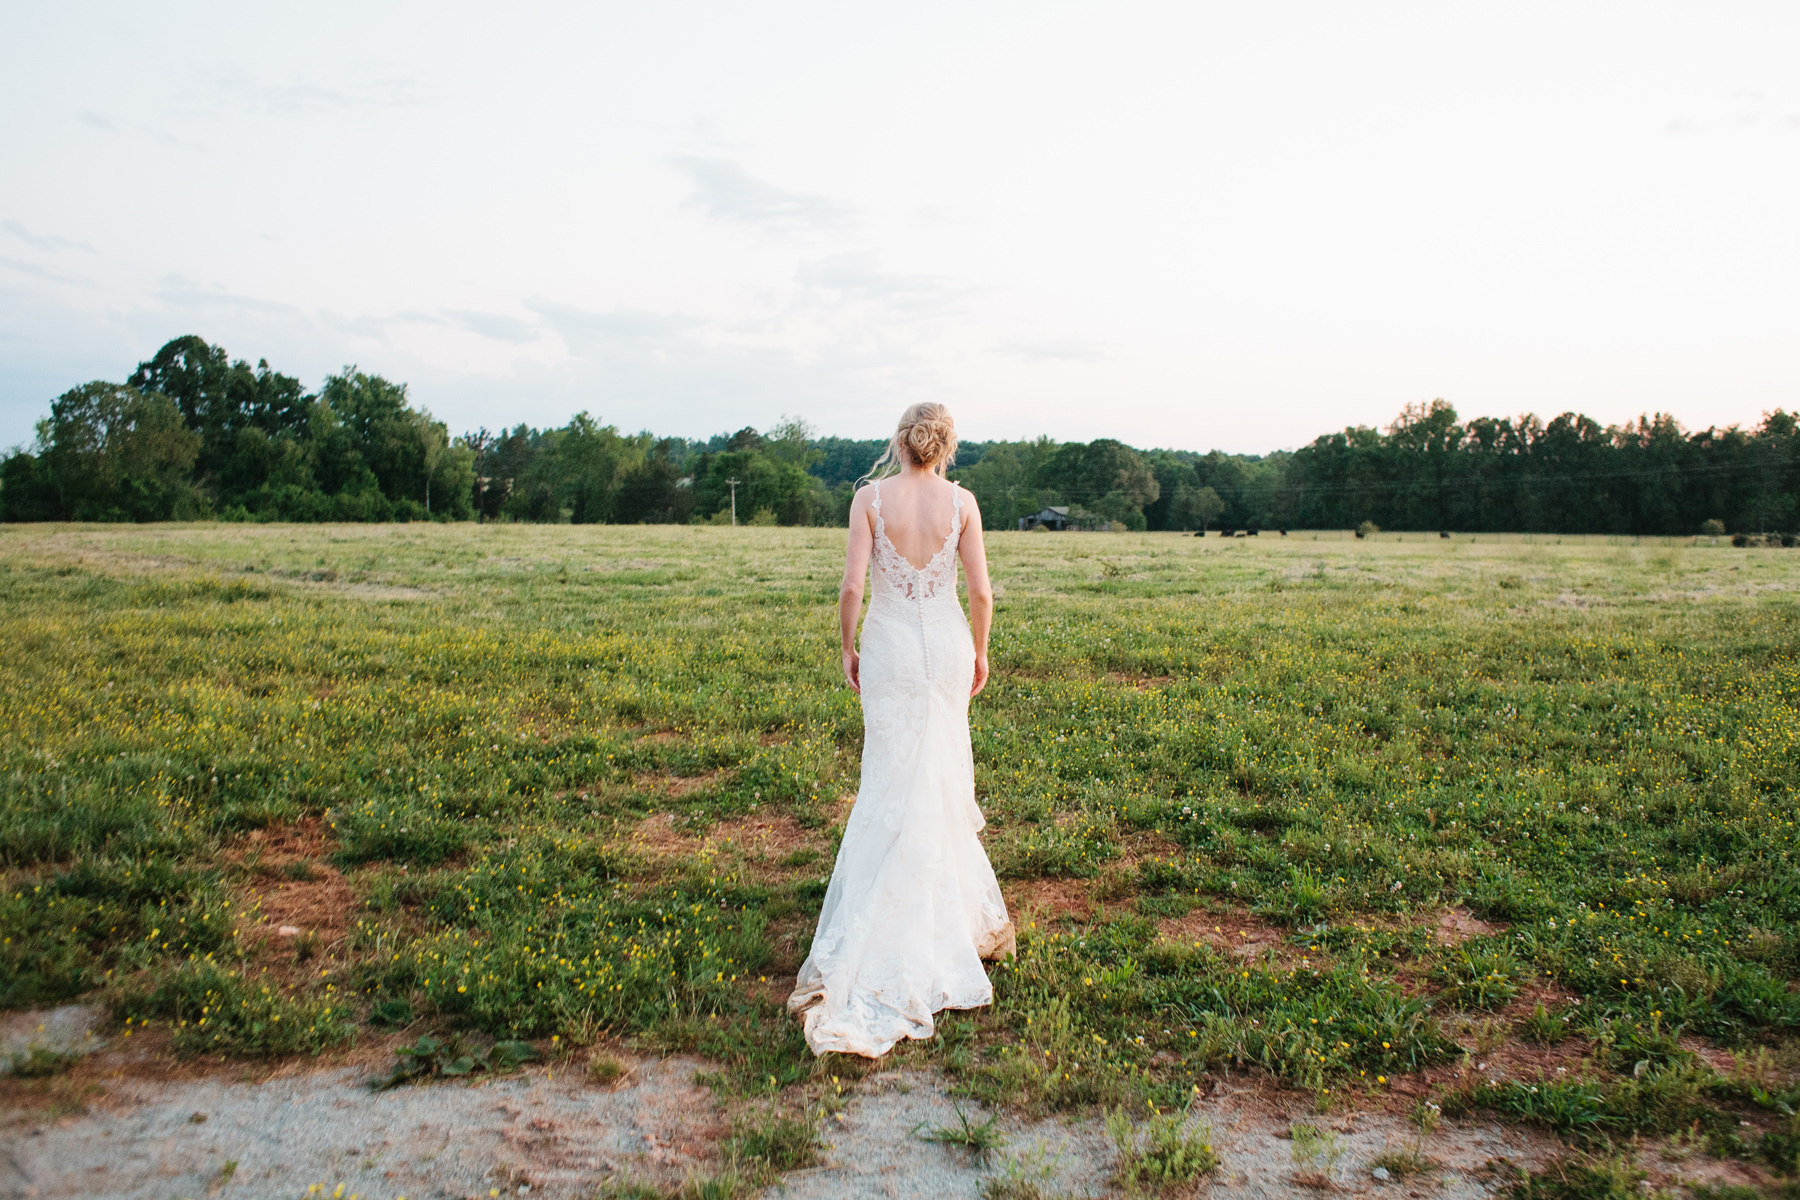 Bride Walking in a Field at Sunset